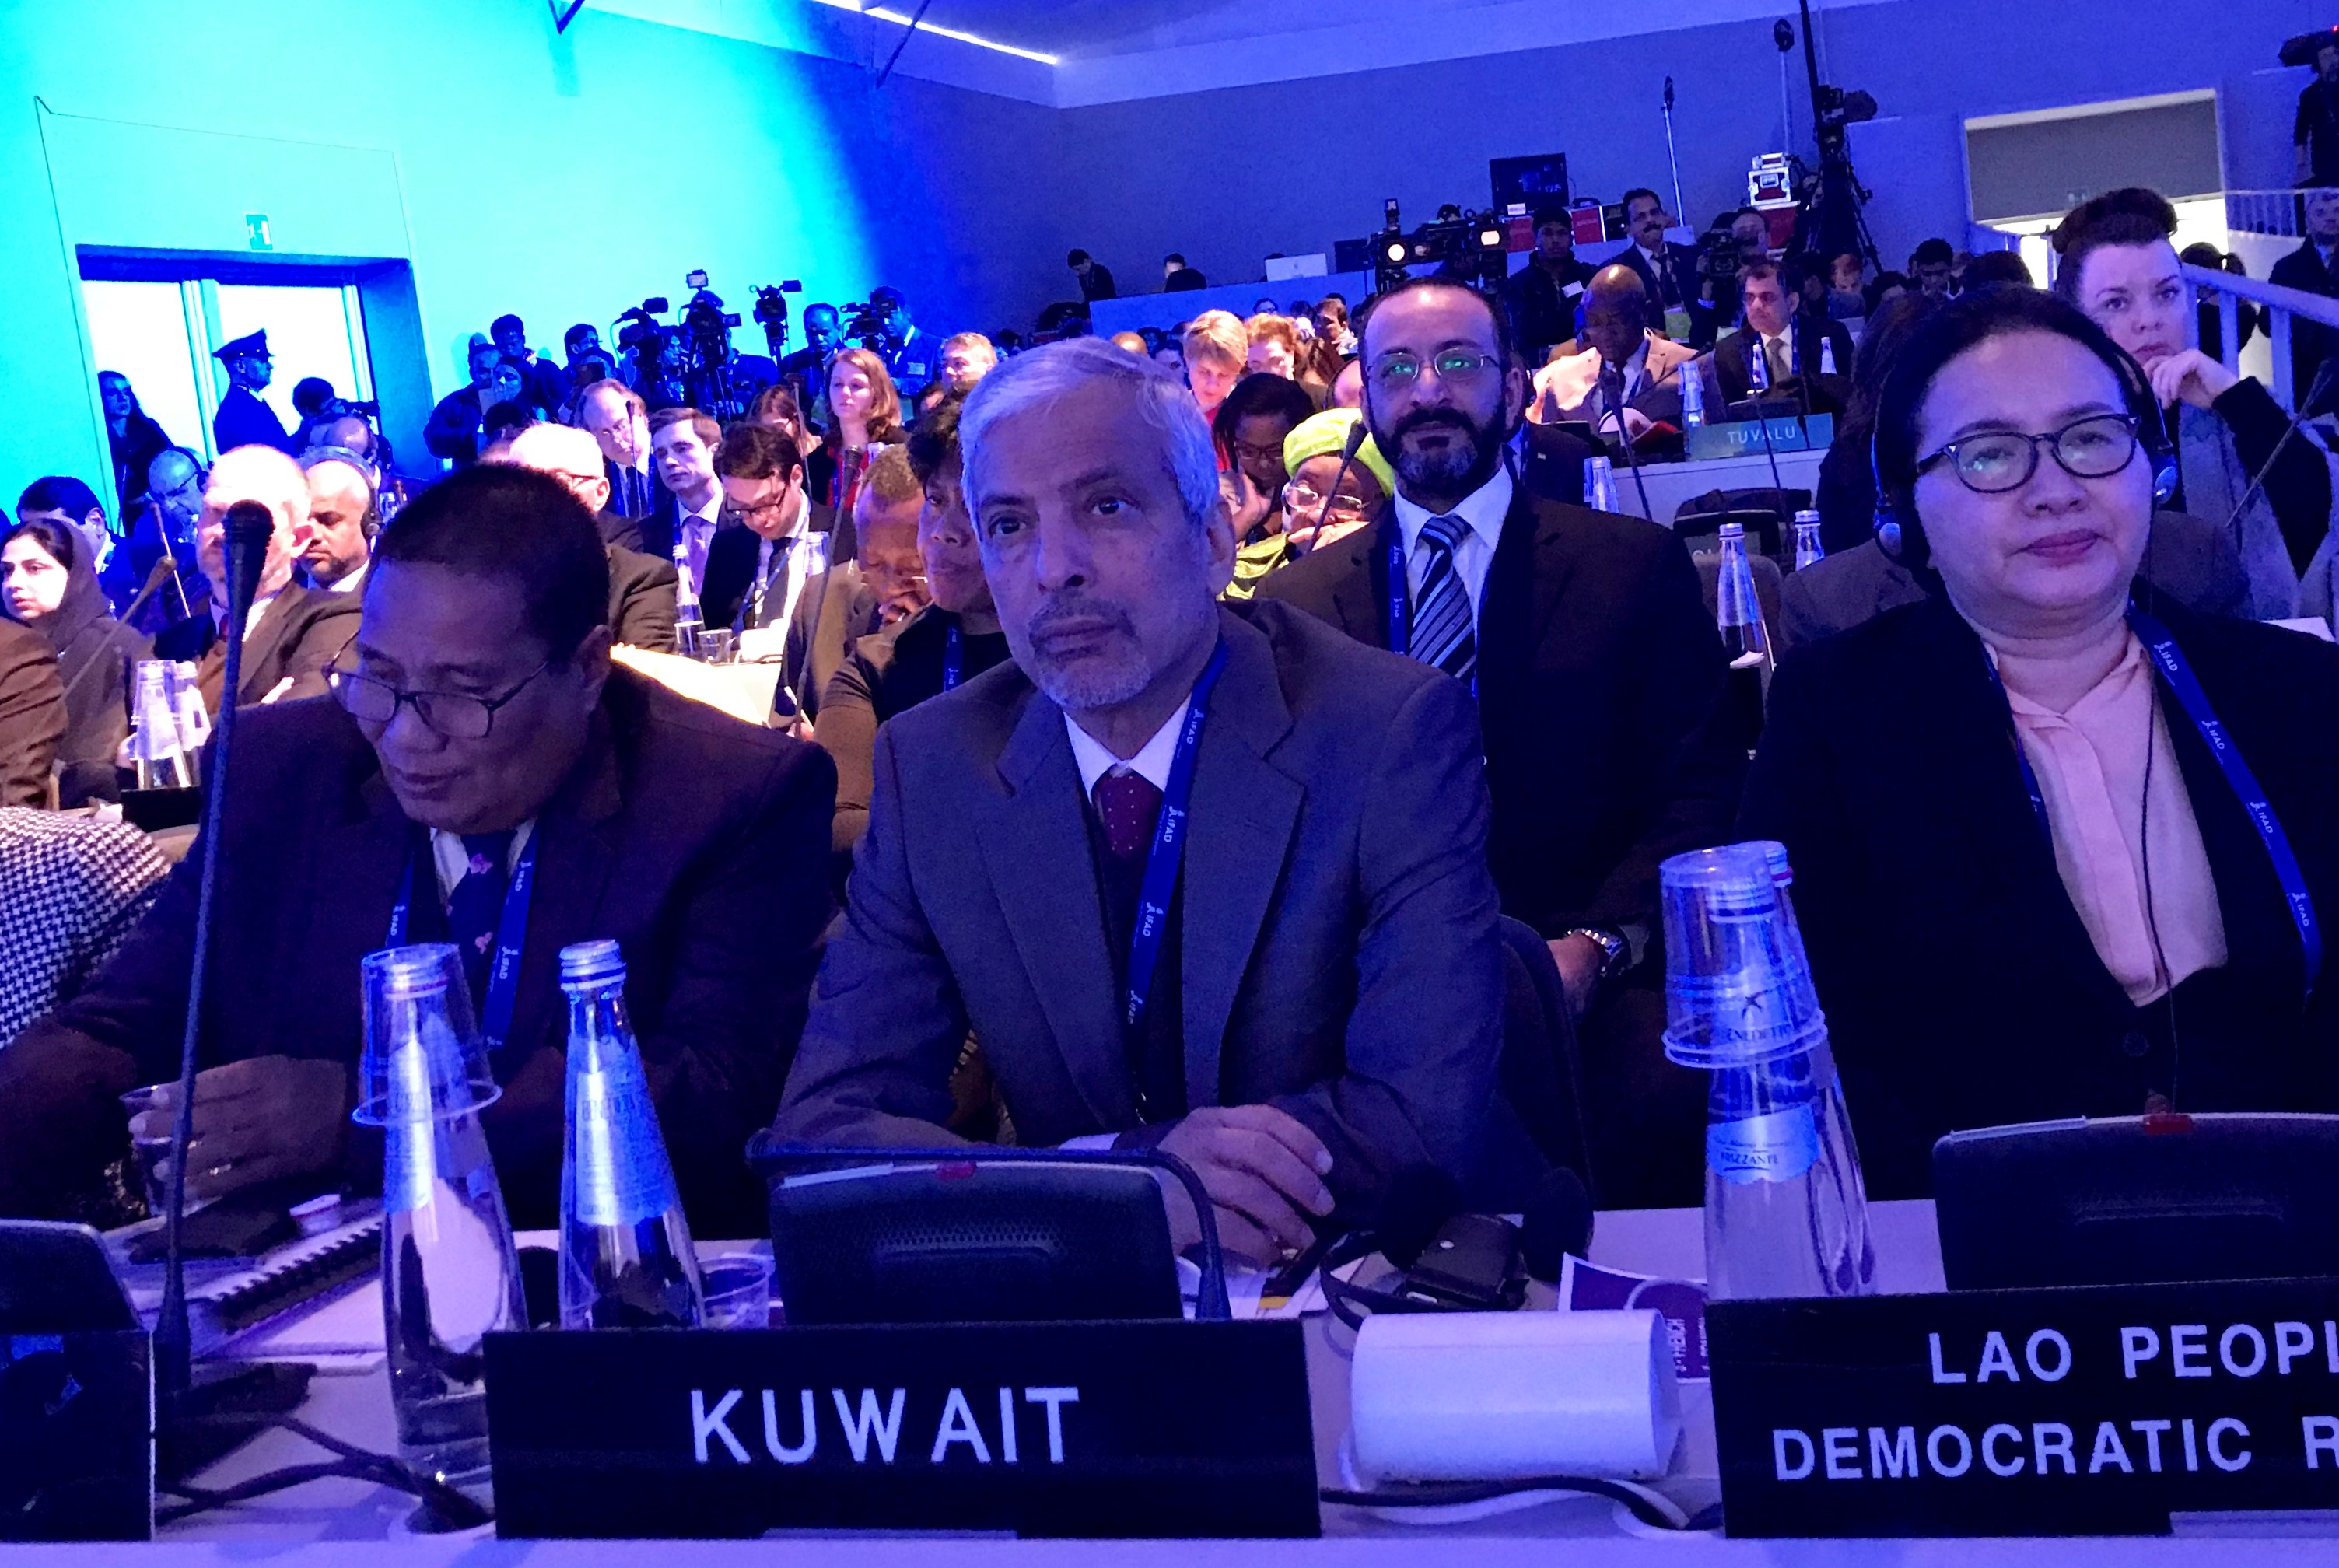 Deputy Director-General of Kuwait Fund for Arab Economic Development (KFAED) Hesham Al-Woqayan and the country's Representative to IFAD Youssef Al-Bader during The 41st session of IFAD